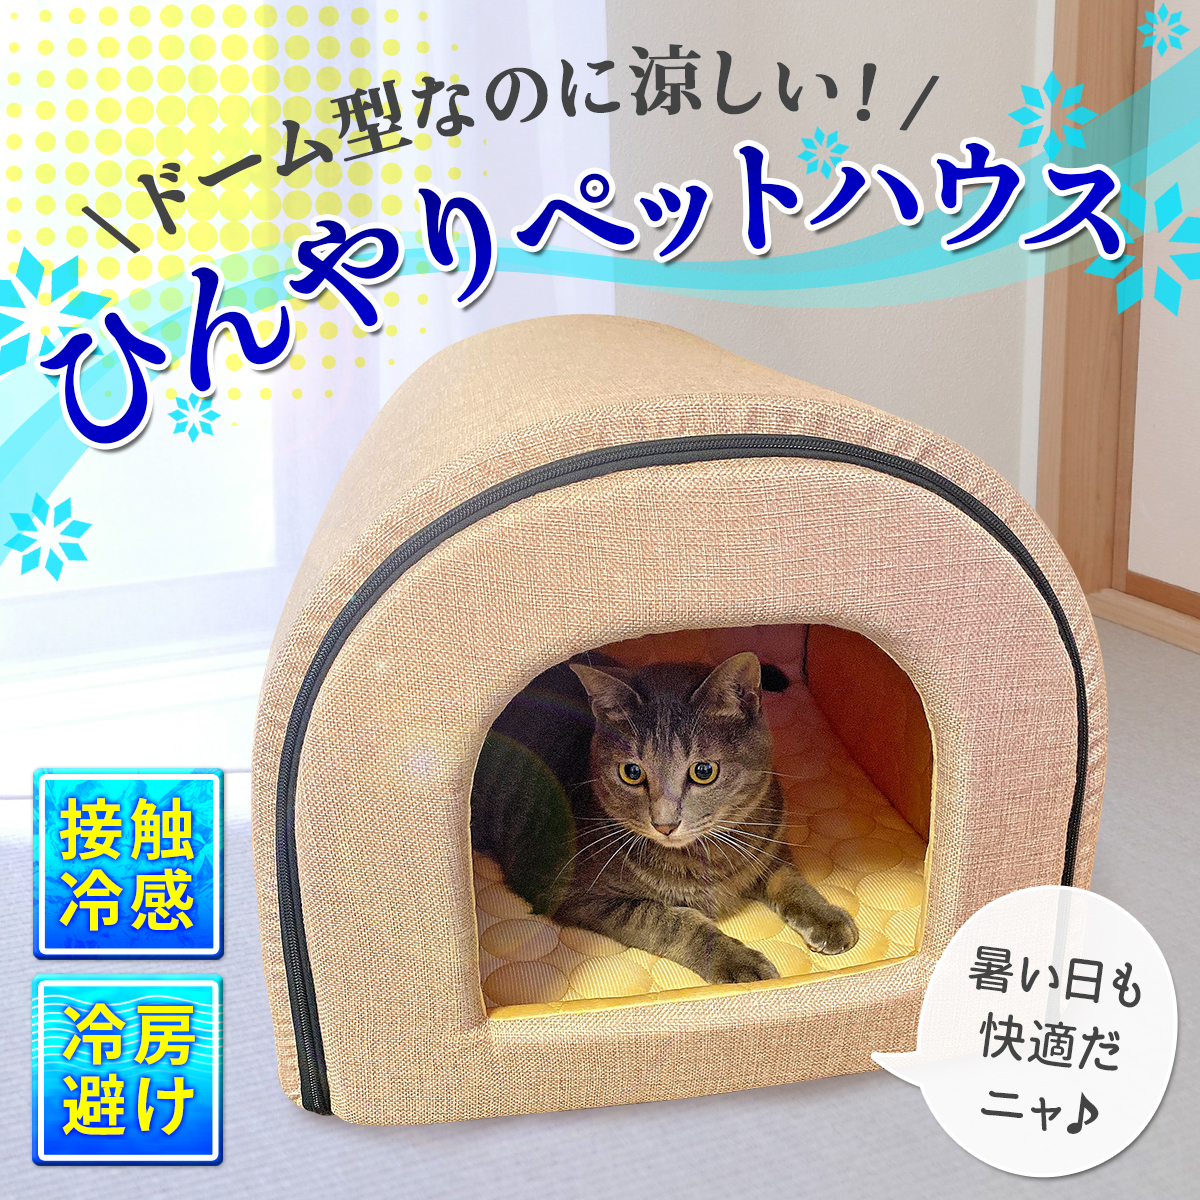  spring for summer dome house dog cat bed dome type house pet bed for summer folding pet mat cat house dog house interior summer .... cold sensation stylish XL size 